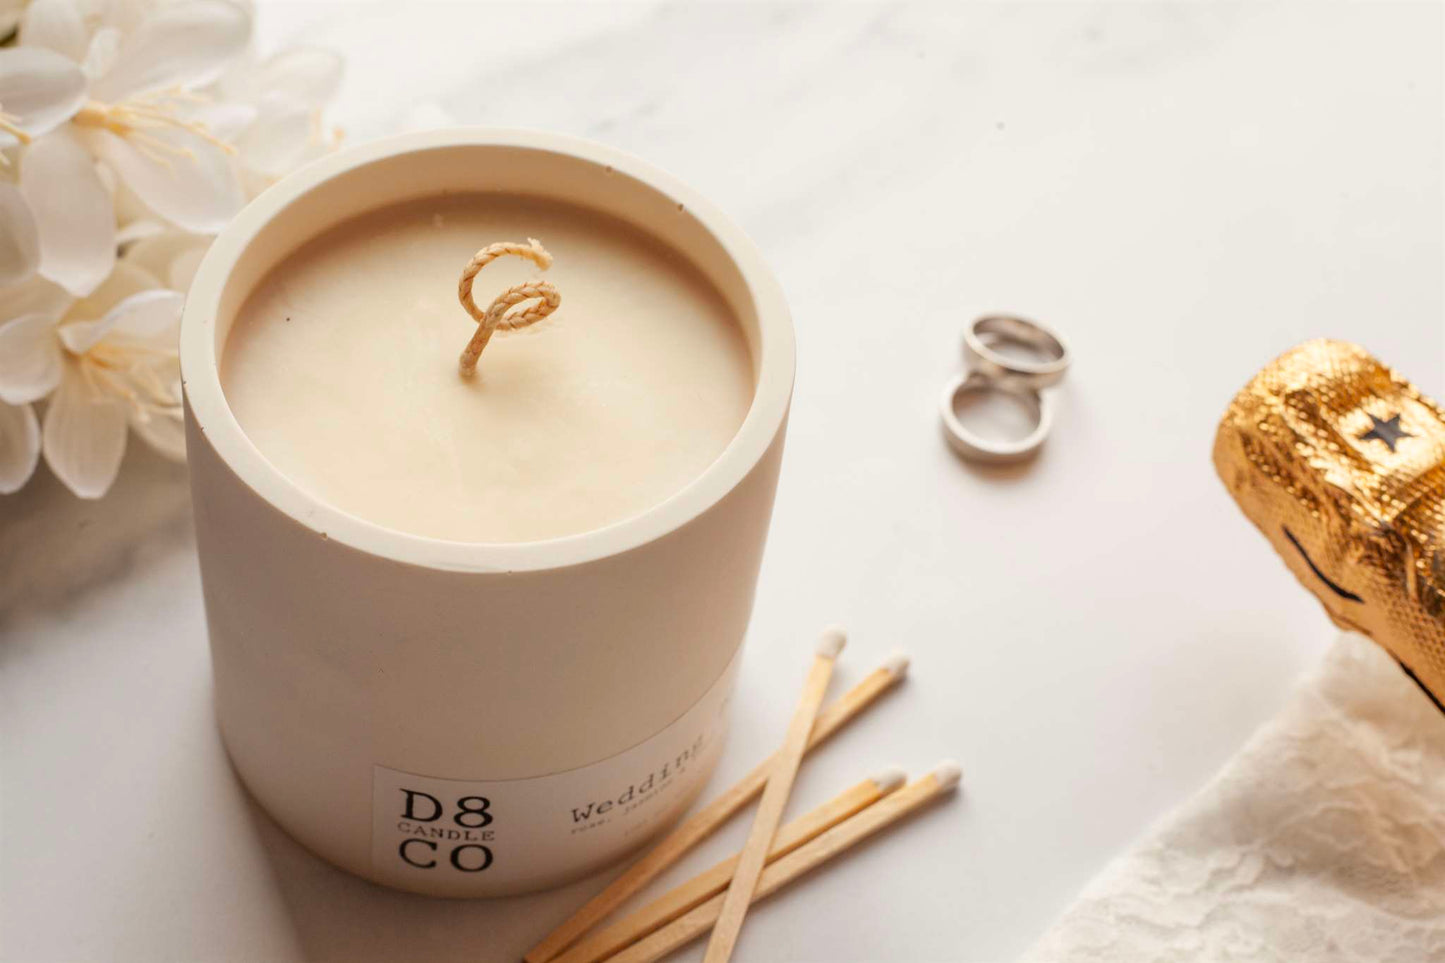 D8 Candle Co. Candles Wedding Day Candle - D8 Candle Co.